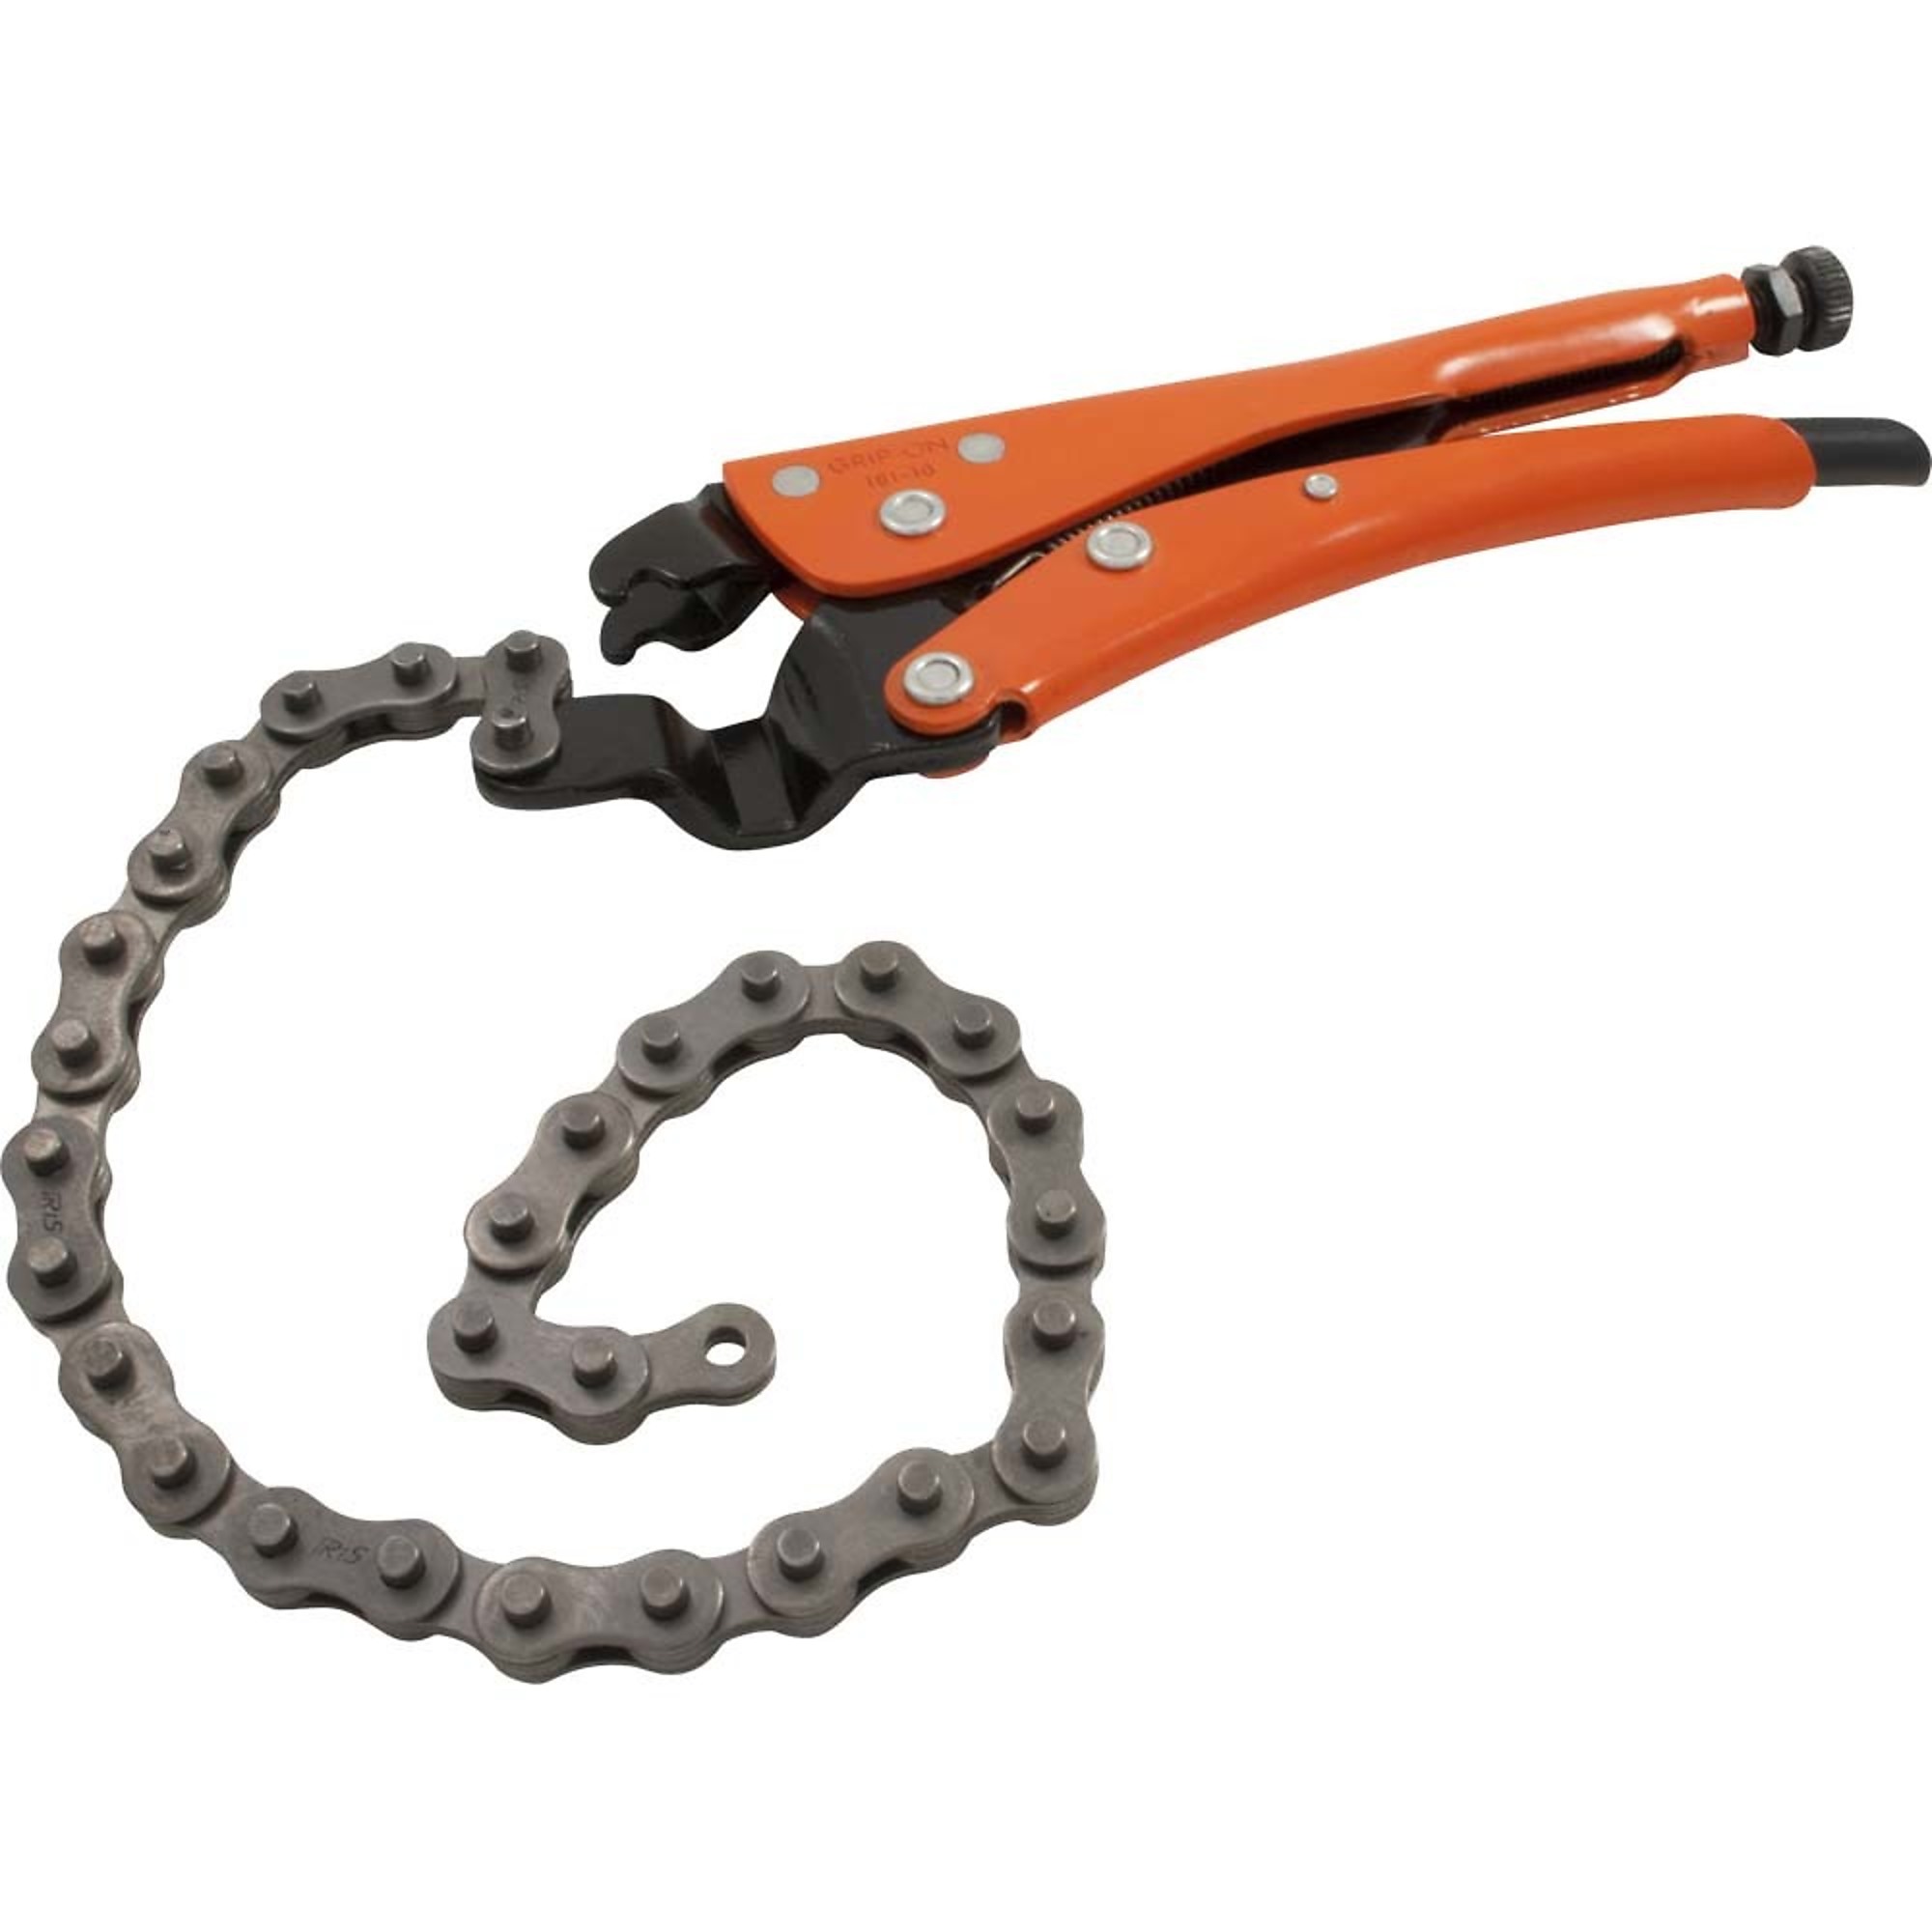 Grip-on, 10Inch Locking Chain Clamp, 6-1/4Inch Jaw Opening, Pieces (qty.) 1 Material Alloy Steel, Jaw Capacity 6.3 in, Model 181-10